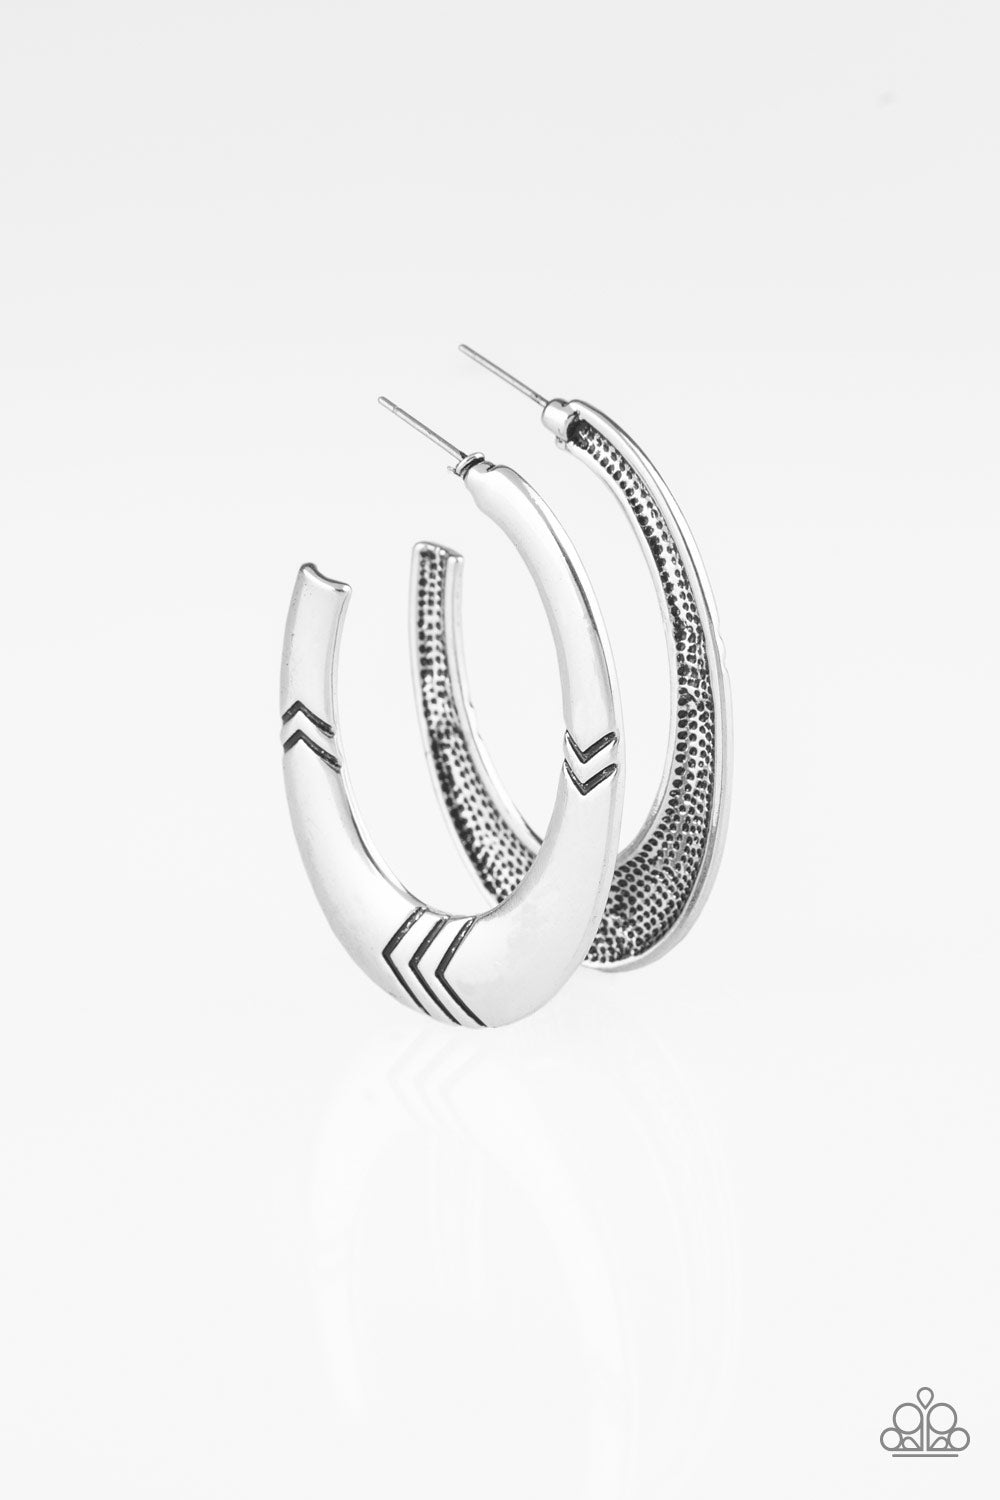 Paparazzi Tribe Pride - Silver Hoop Earrings - A Finishing Touch 